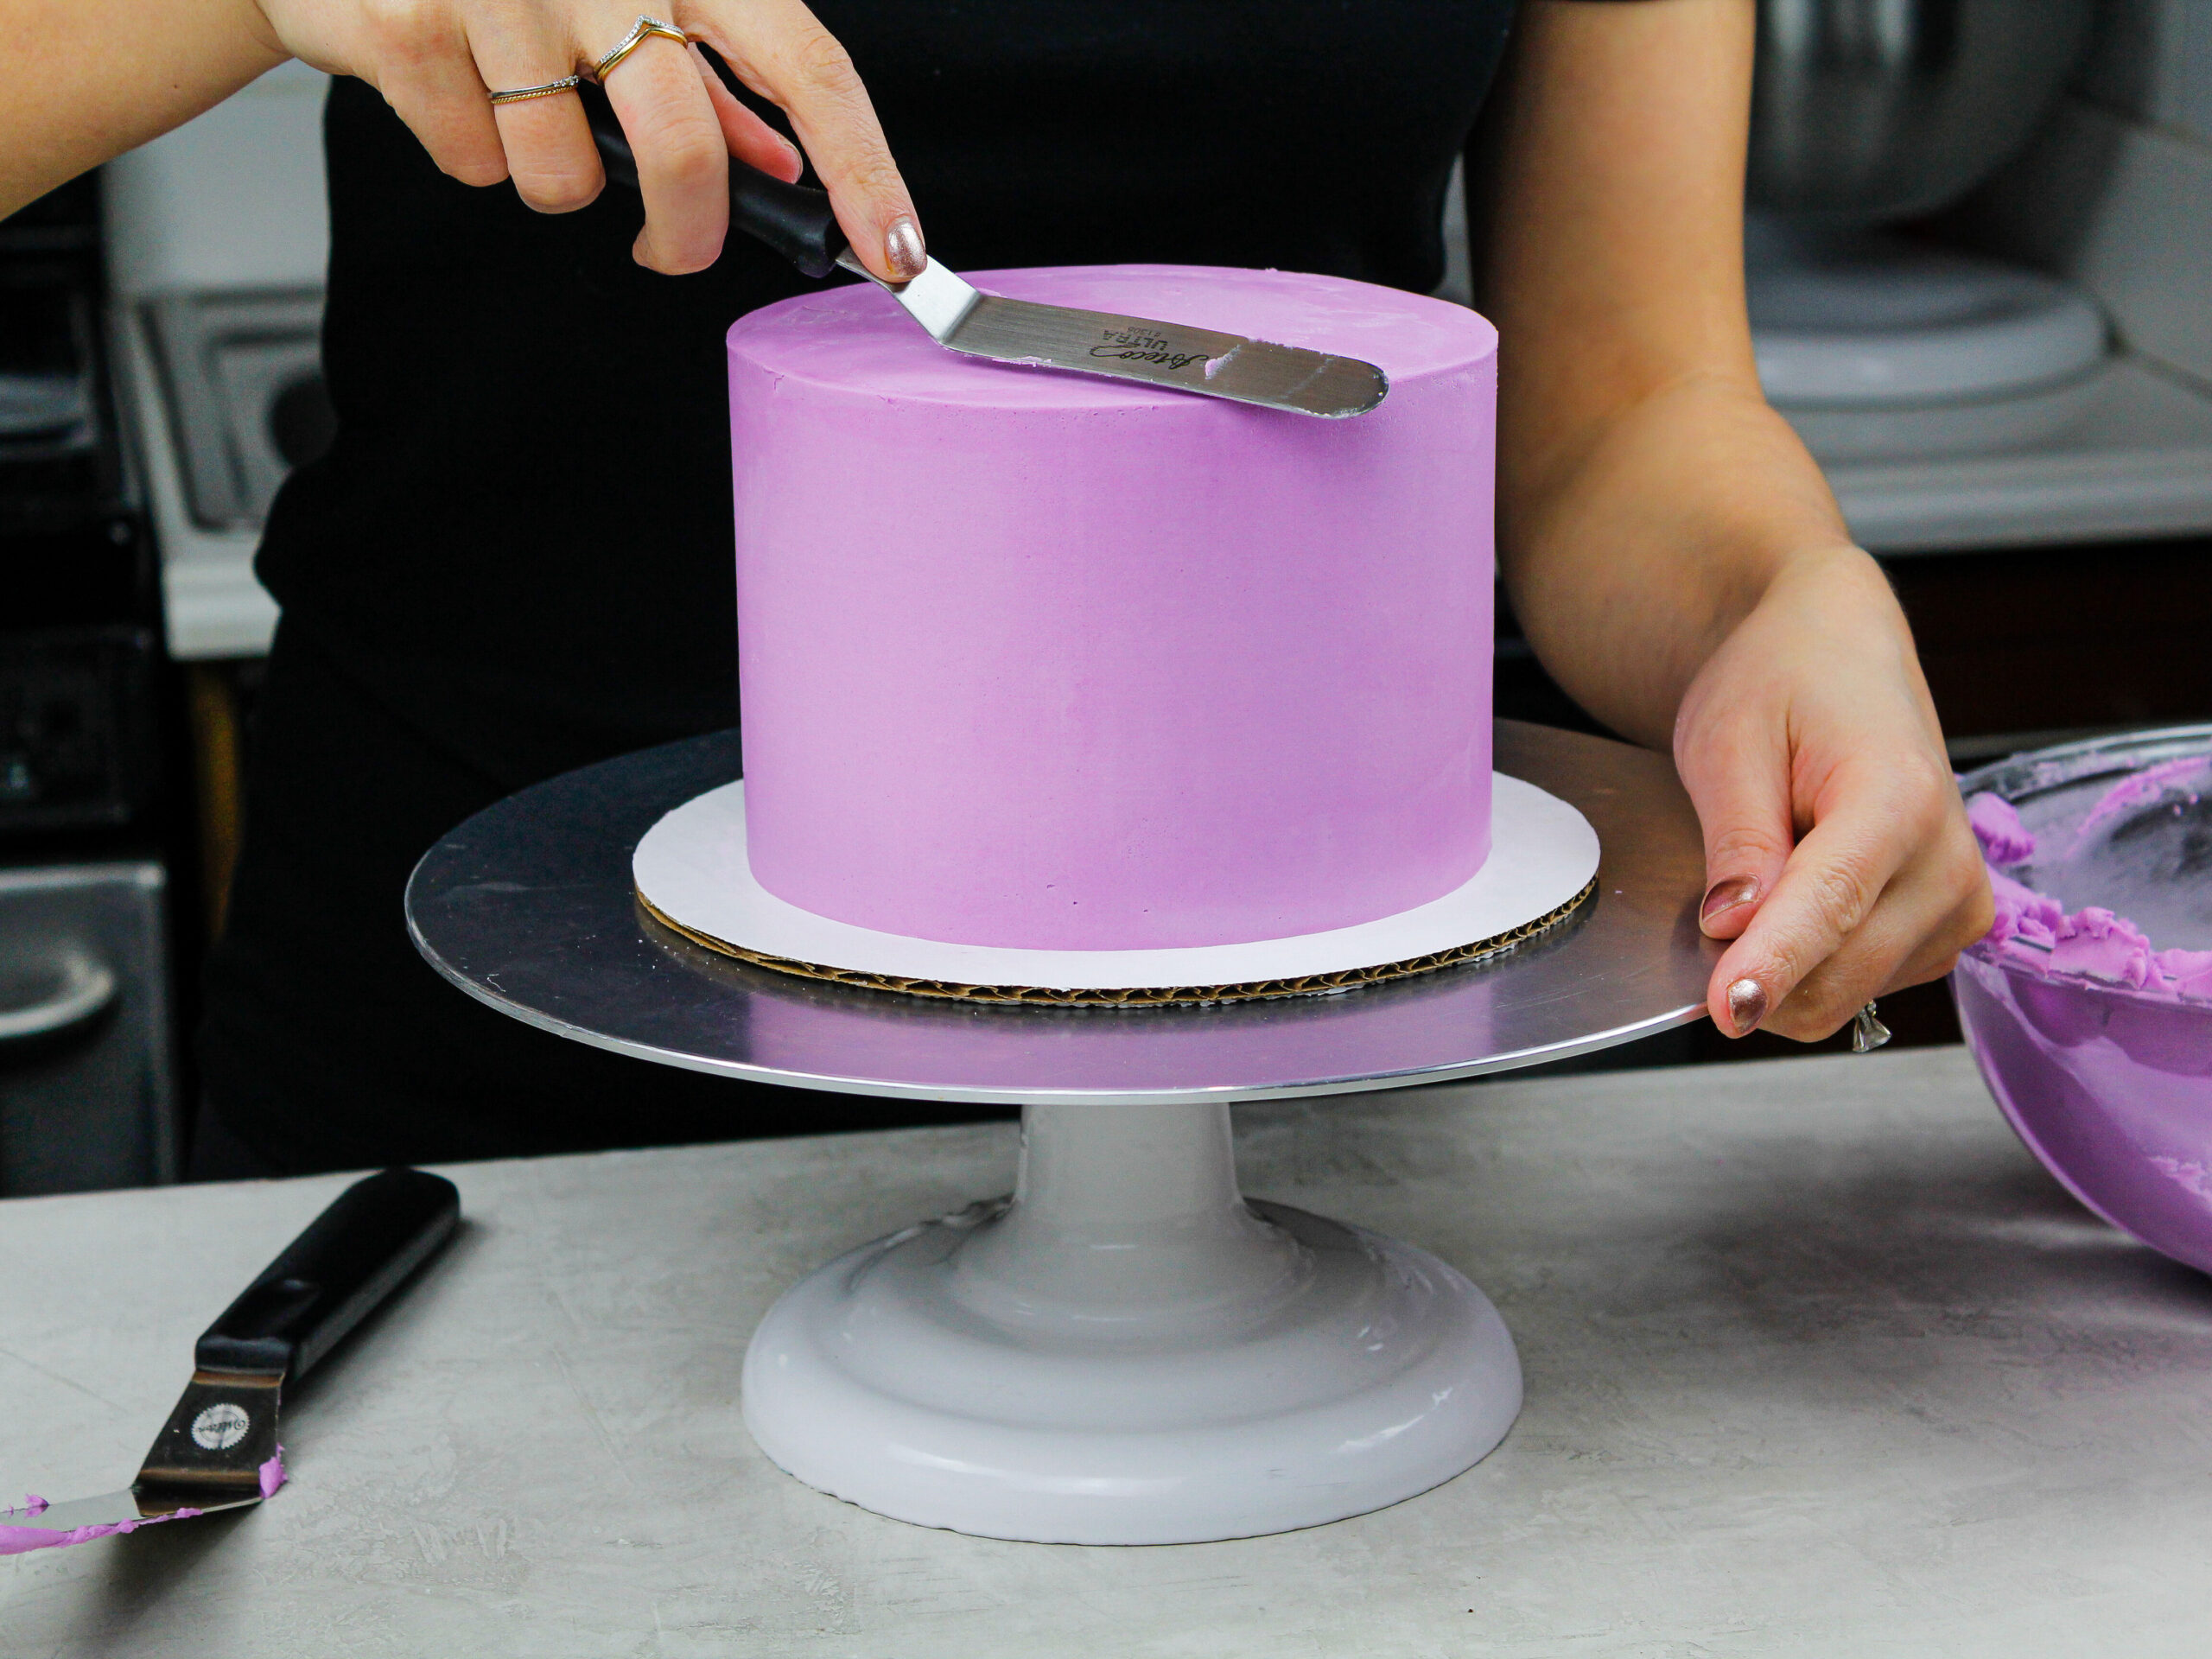 image of a purple cake being frosted with buttercream to have super smooth sides and sharp edges